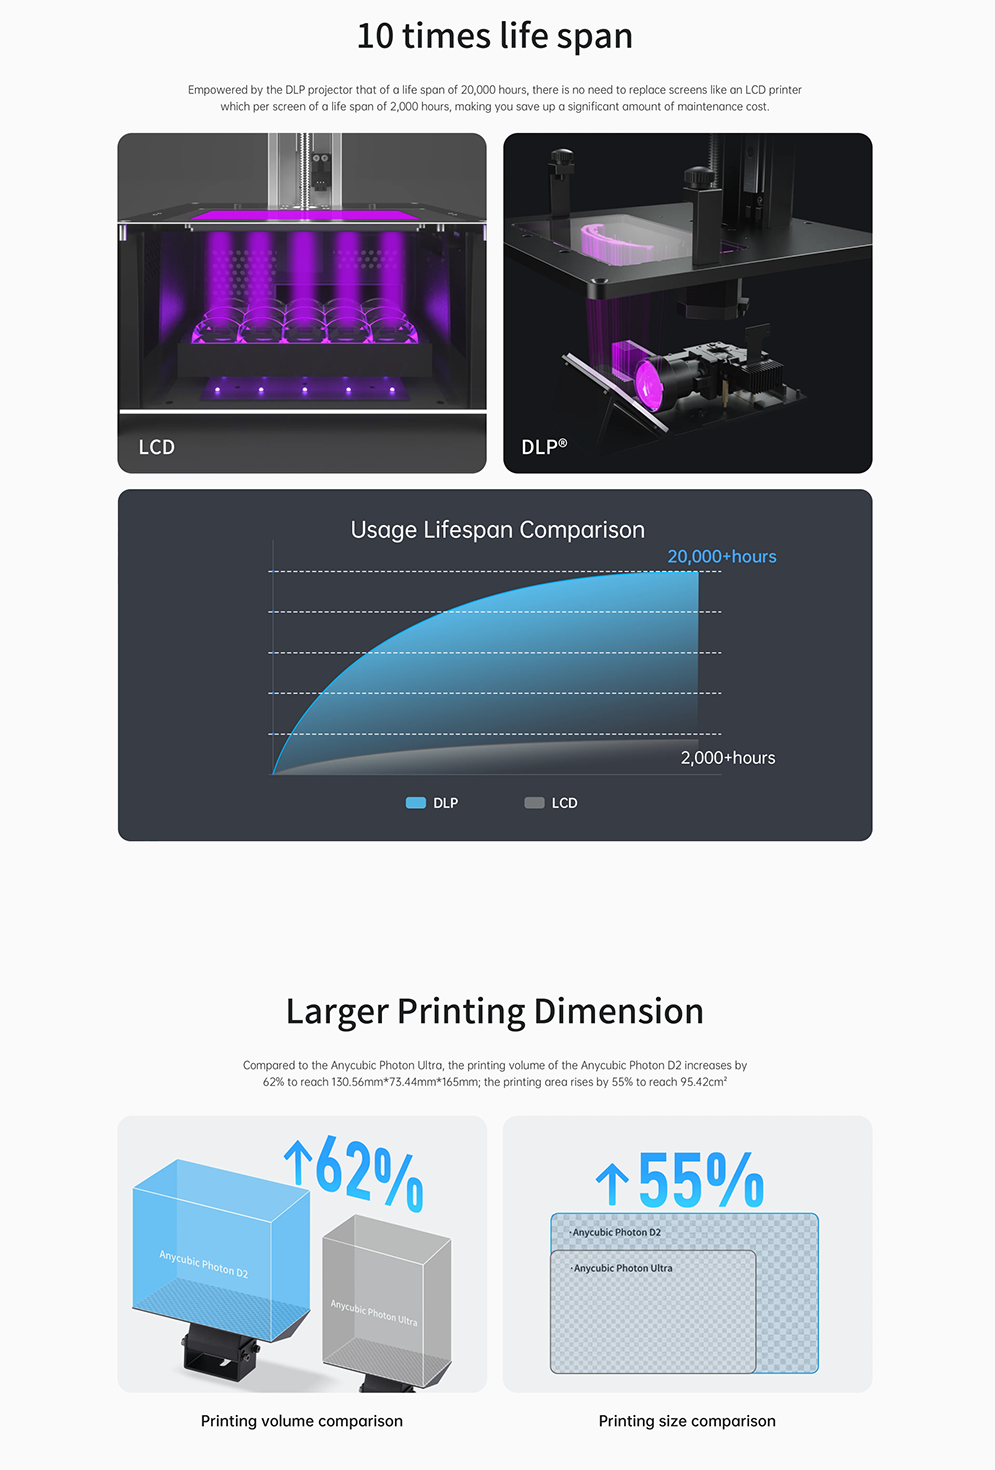 ANYCUBIC Photon D2 Resin 3D Printer, DLP 3D Printer with High Precision,  Ultra-Silent Printing & Long Usage Life-Span, Upgraded Printing Size 5.1''  x